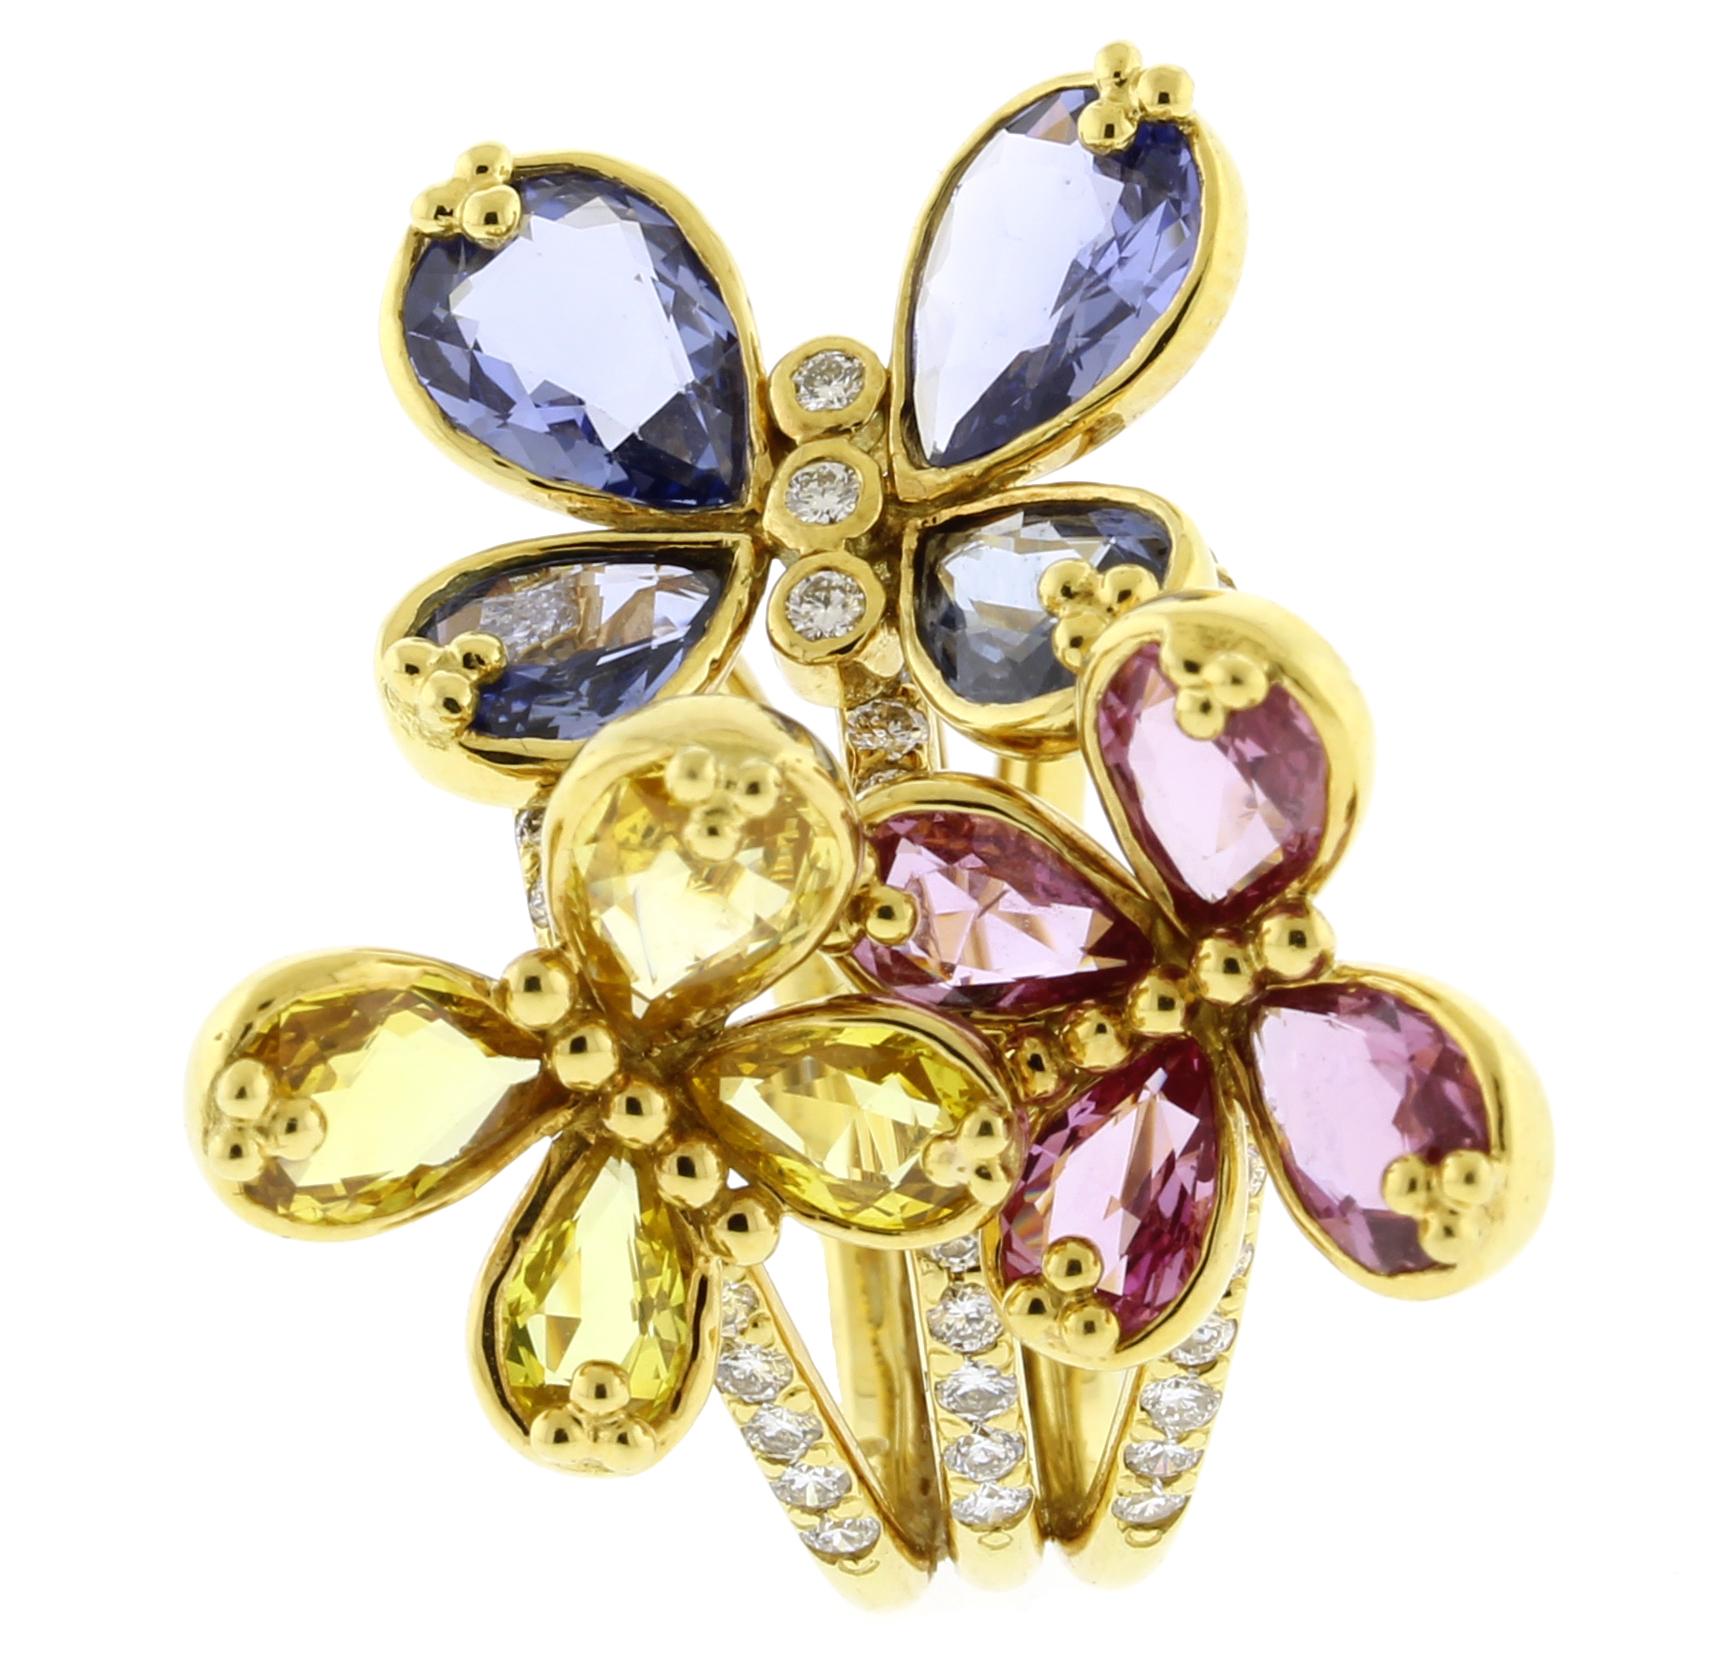 This ring has three butterflies one with blue sapphires, pink sapphires and yellow sapphires.  The butterflies each can move front to back.
♦ Designer: Temple St. Clair
♦ Metal: 18 karat yellow gold
♦ Gemstones: Diamonds, Blue, Pink and Yellow